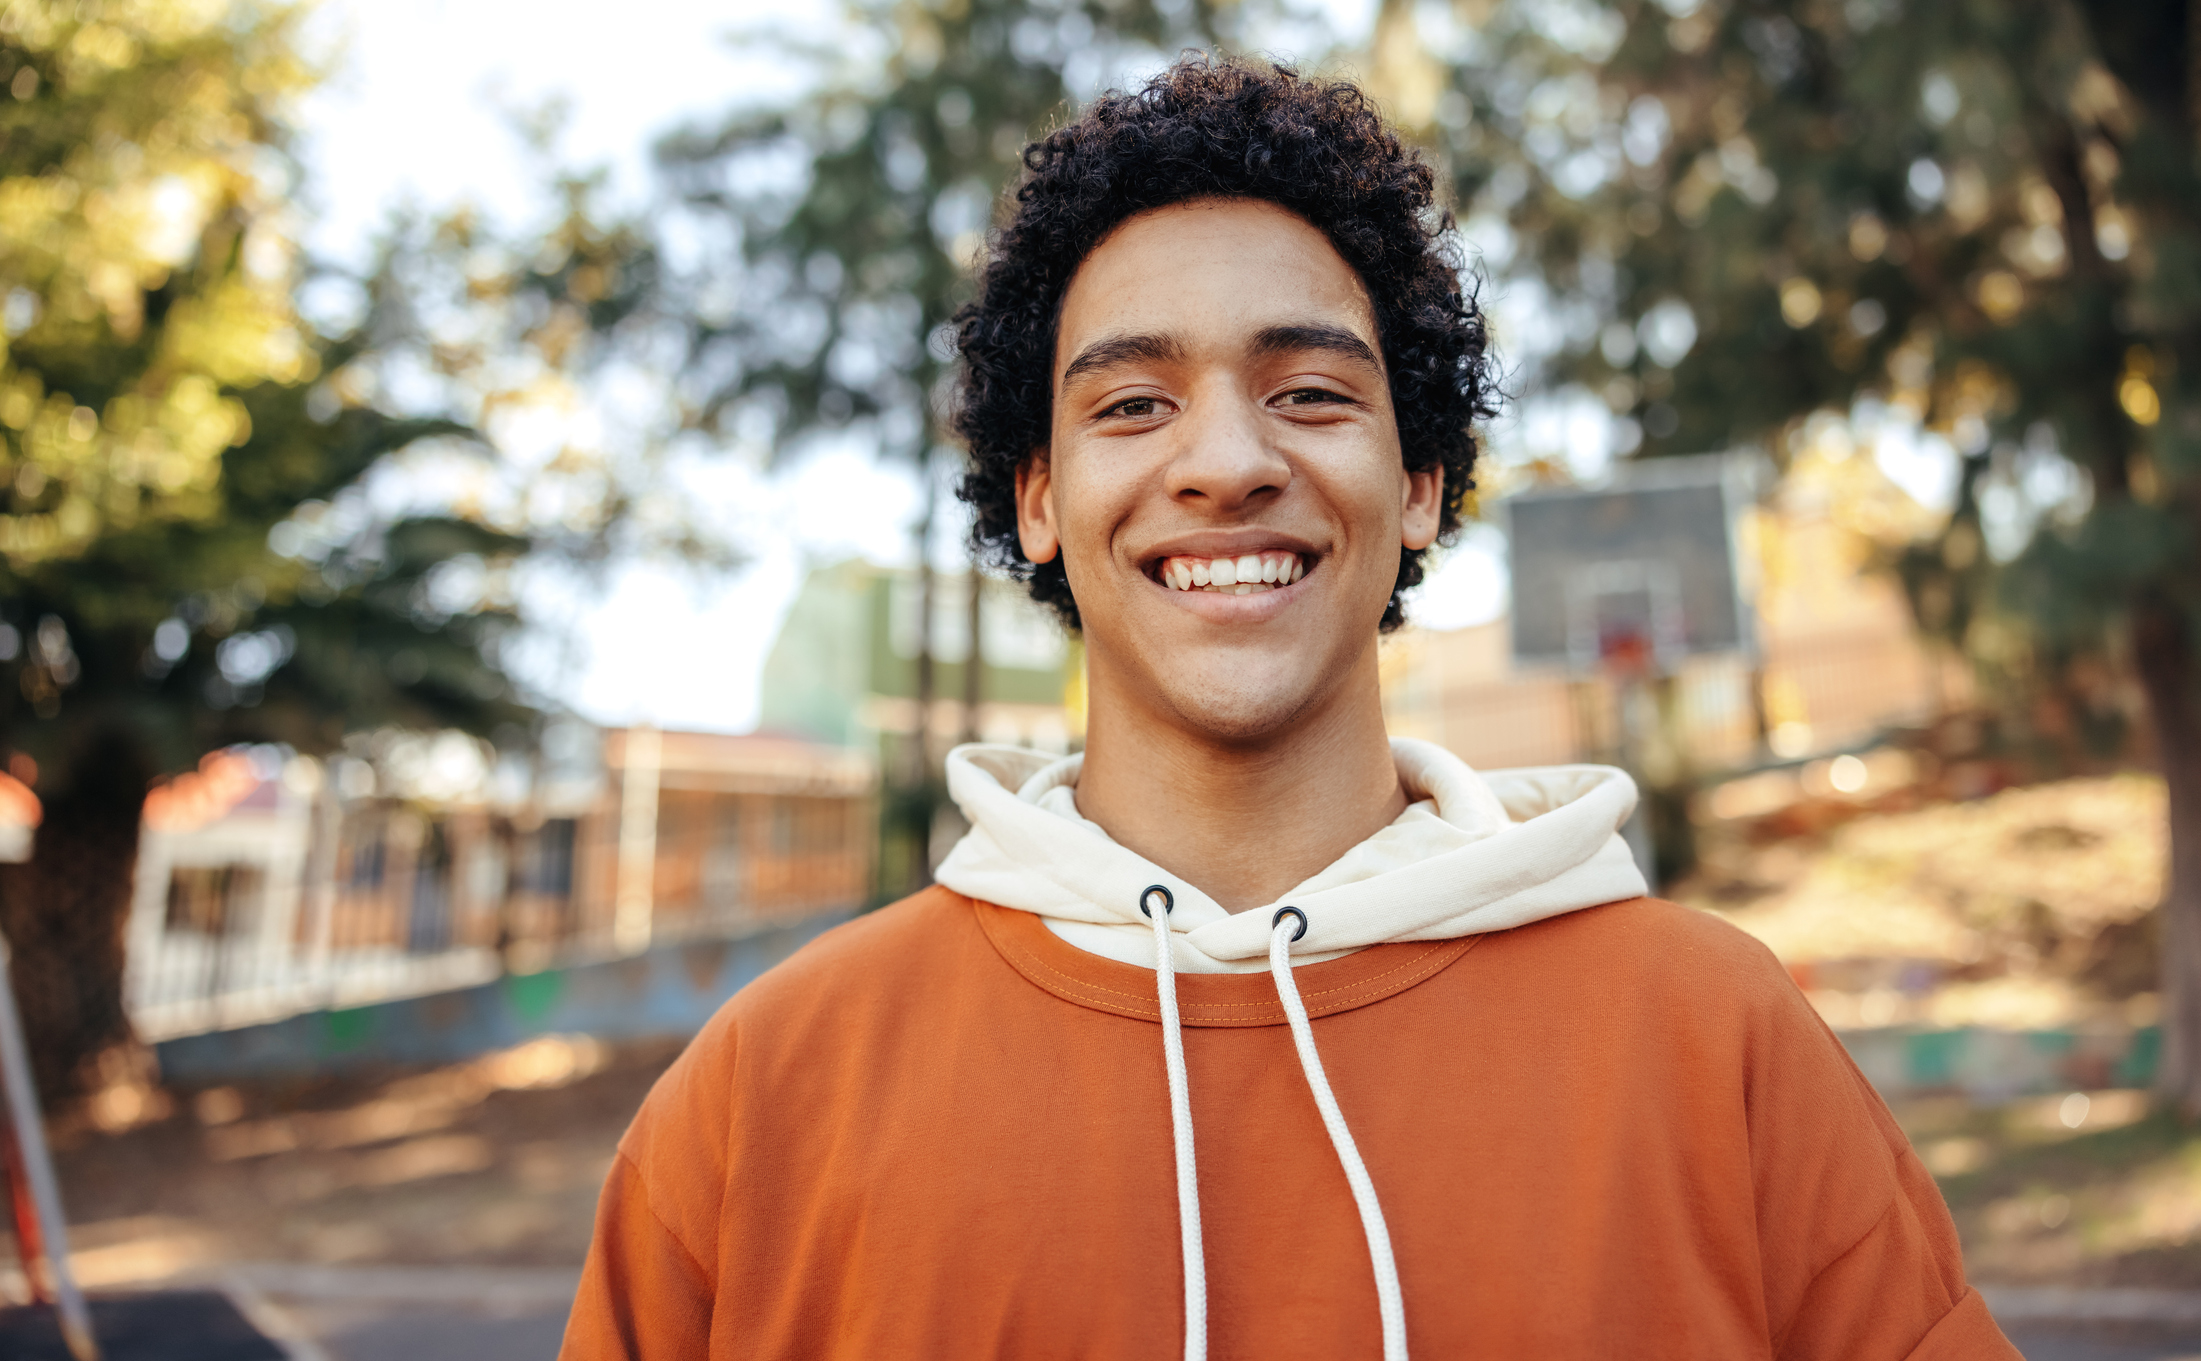 a teenage male with black curly hair and dark eyes is standing outside and smiling straight at the camera